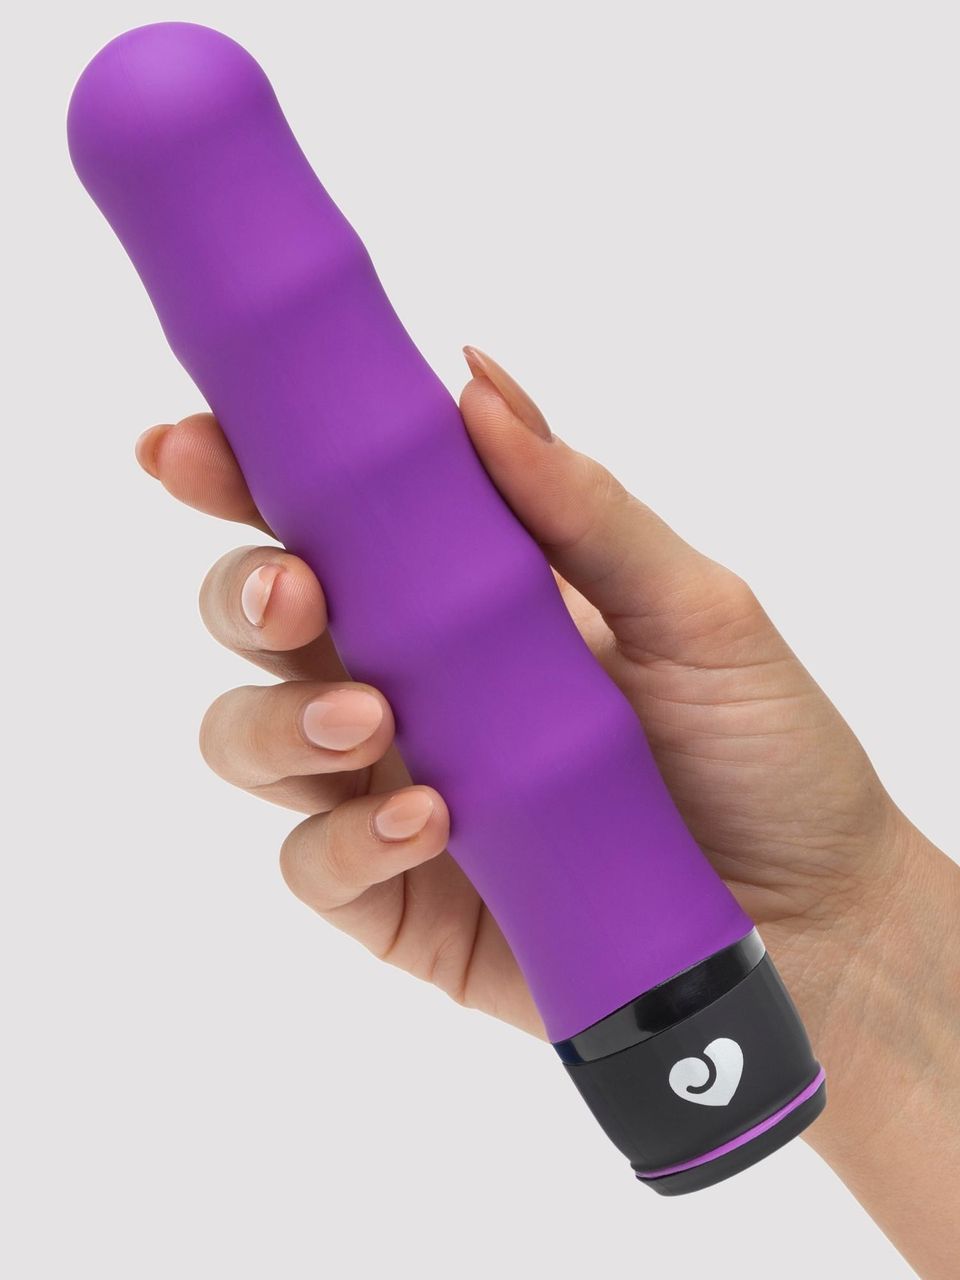 20 Waterproof Sex Toys To Make Bath Time Lots Of Fun Huffpost Life